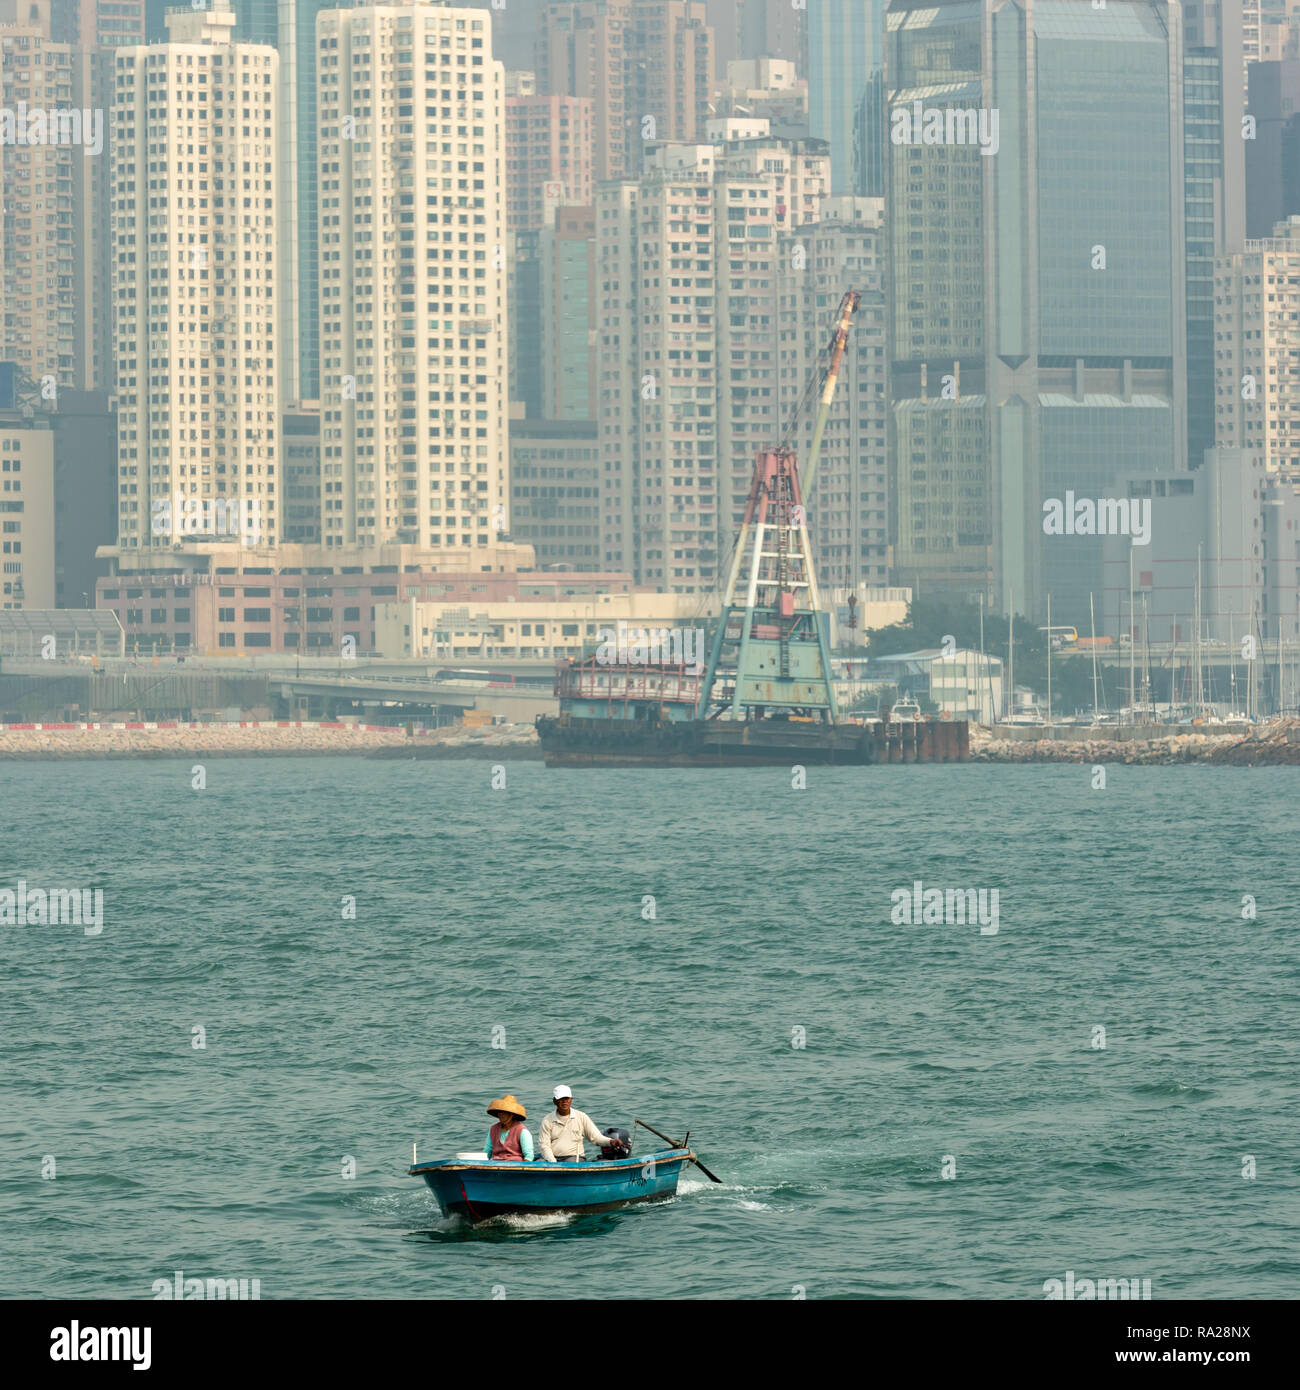 A couple in a small boat in Victoria Harbour, Hong Kong with the massed tower blocks of North Point in the background Stock Photo